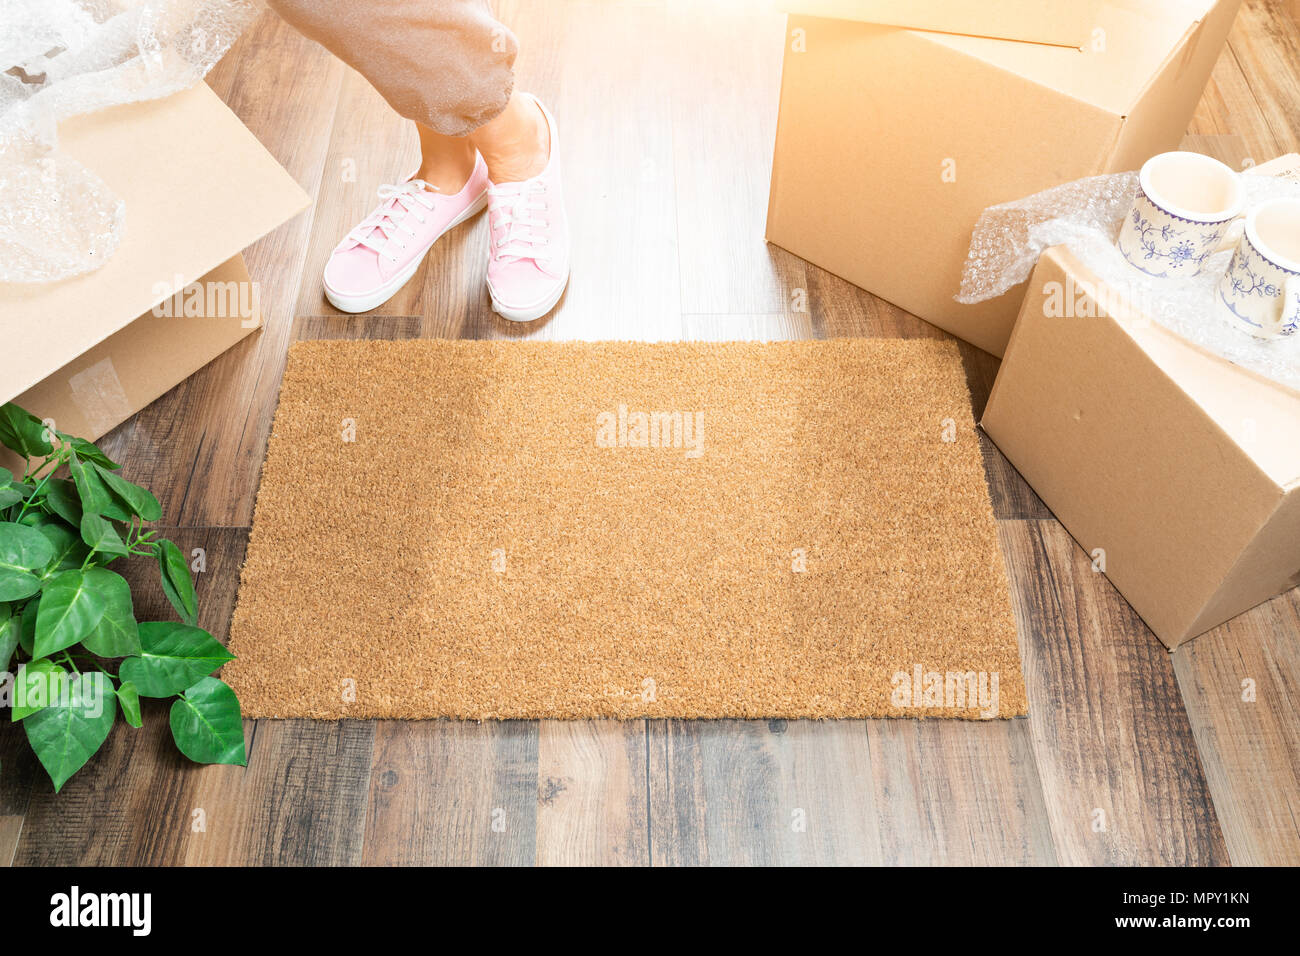 Woman in Pink Shoes and Sweats Standing Near Home Sweet Home Welcome Mat, Boxes and Plant. Stock Photo